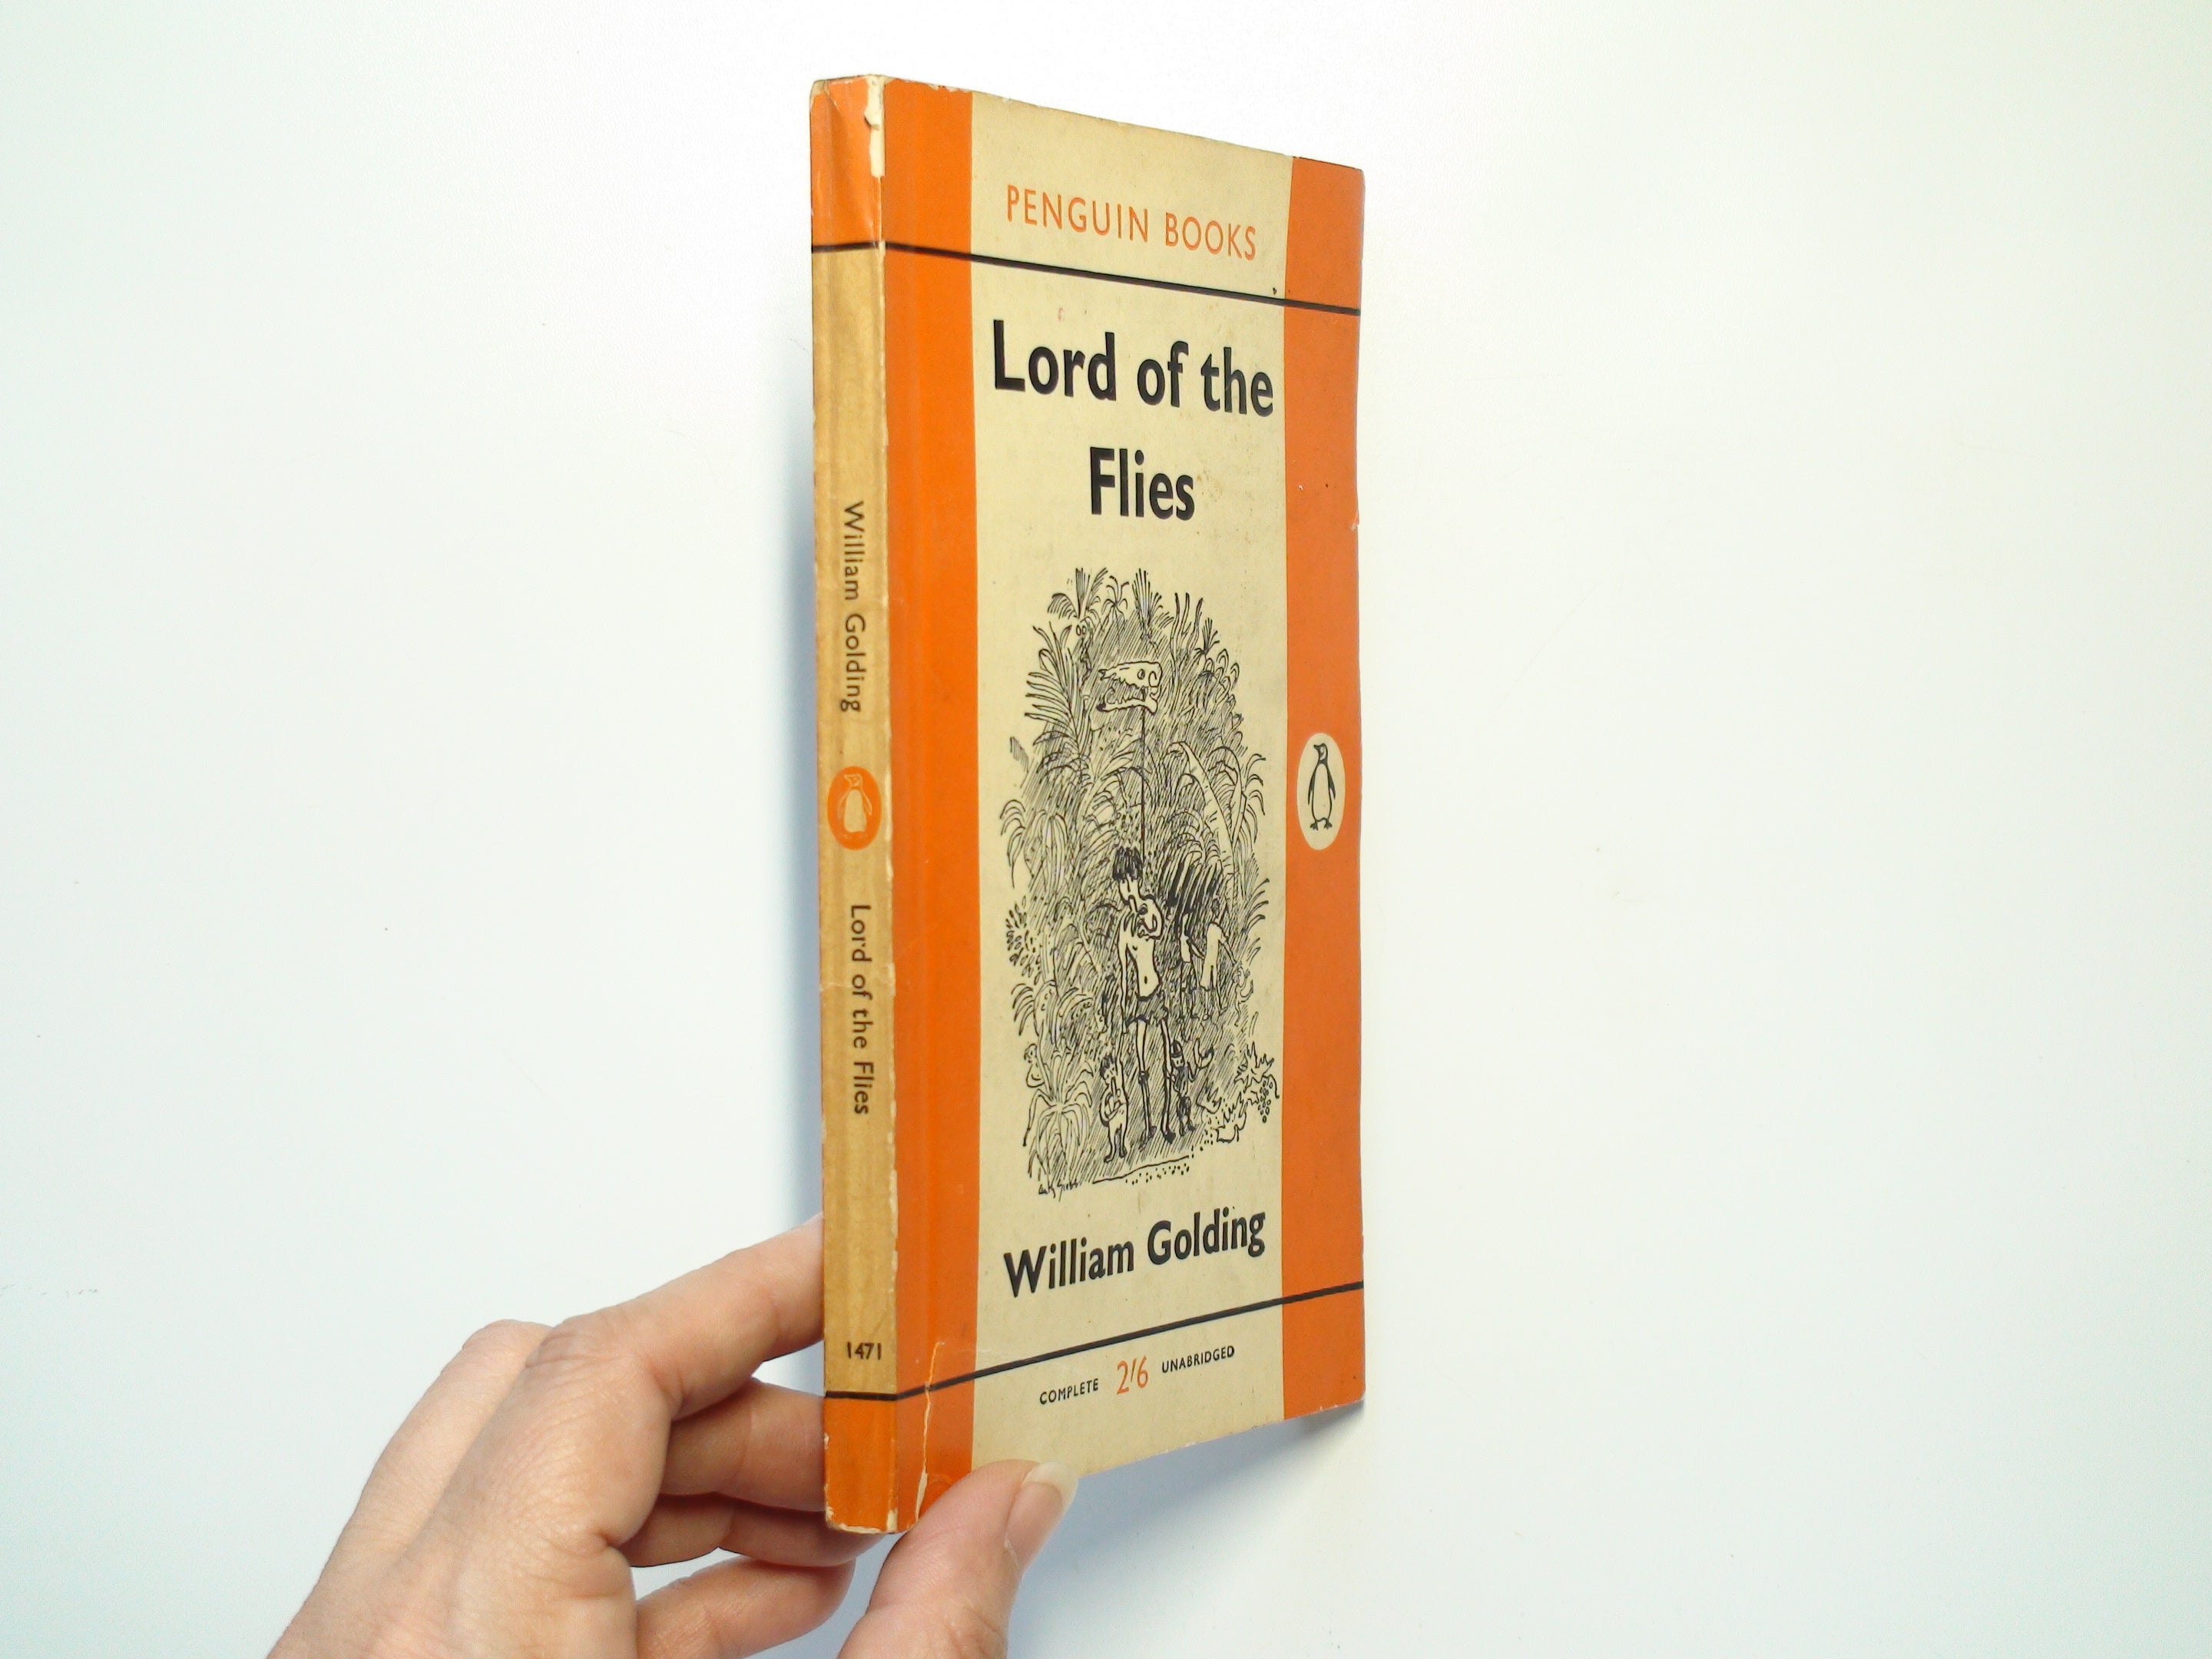 Lord of the Flies, William Golding, Penguin Books, Vintage, 1960